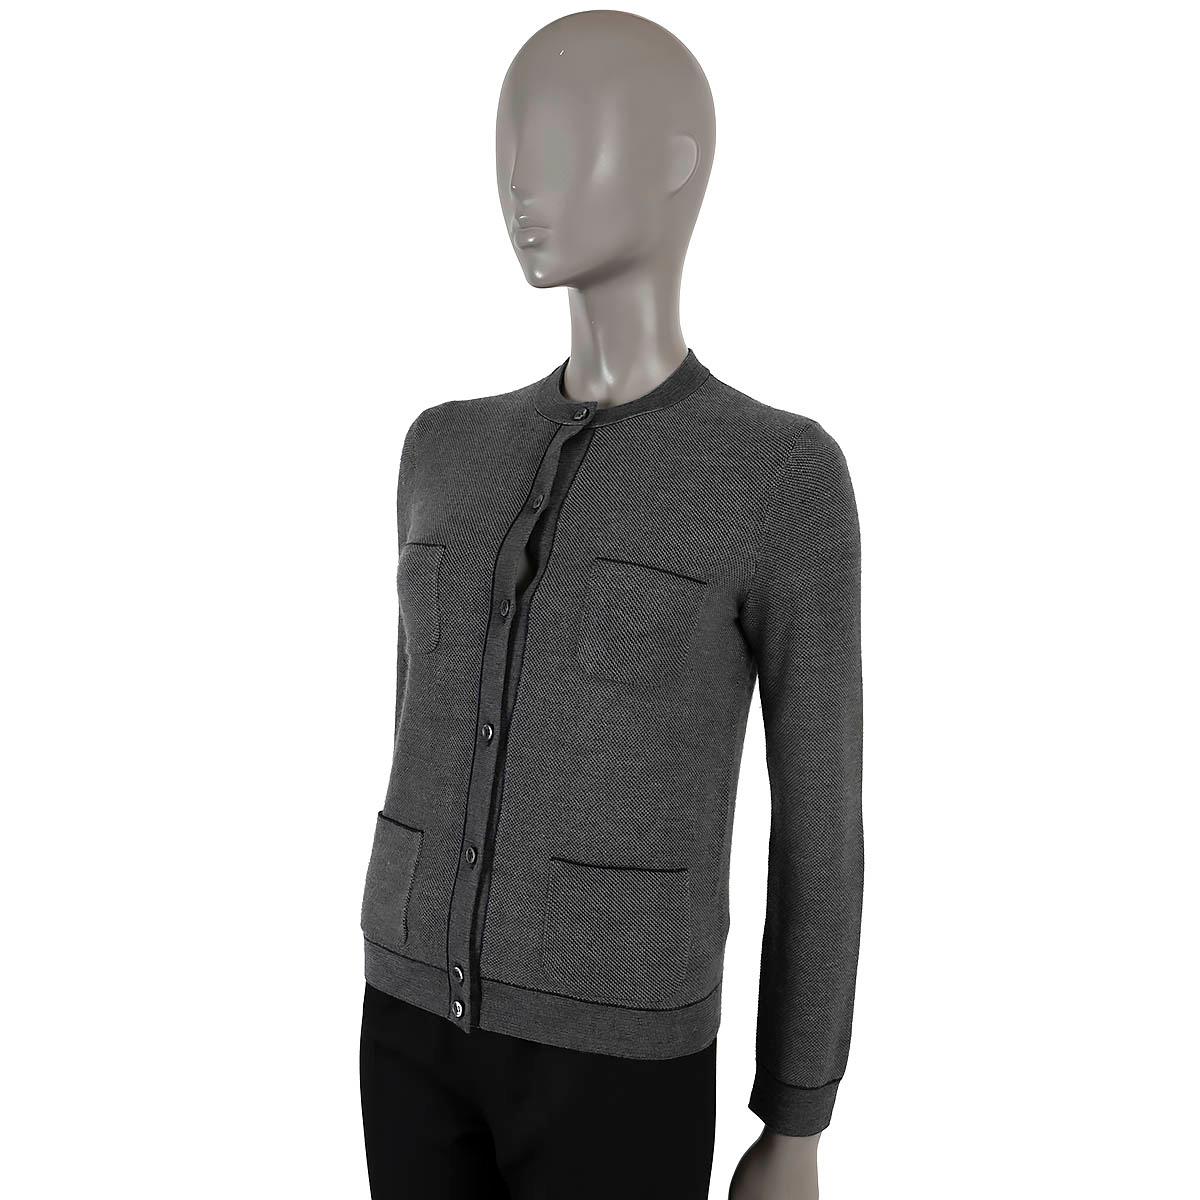 100% authentic Loro Piana cardigan in grey and navy blue silk (64%) and cashmere (36%). Features four patch pockets on the front and opens with buttons. Has been worn and is in excellent condition. 

Matching sweater vest and pants available in